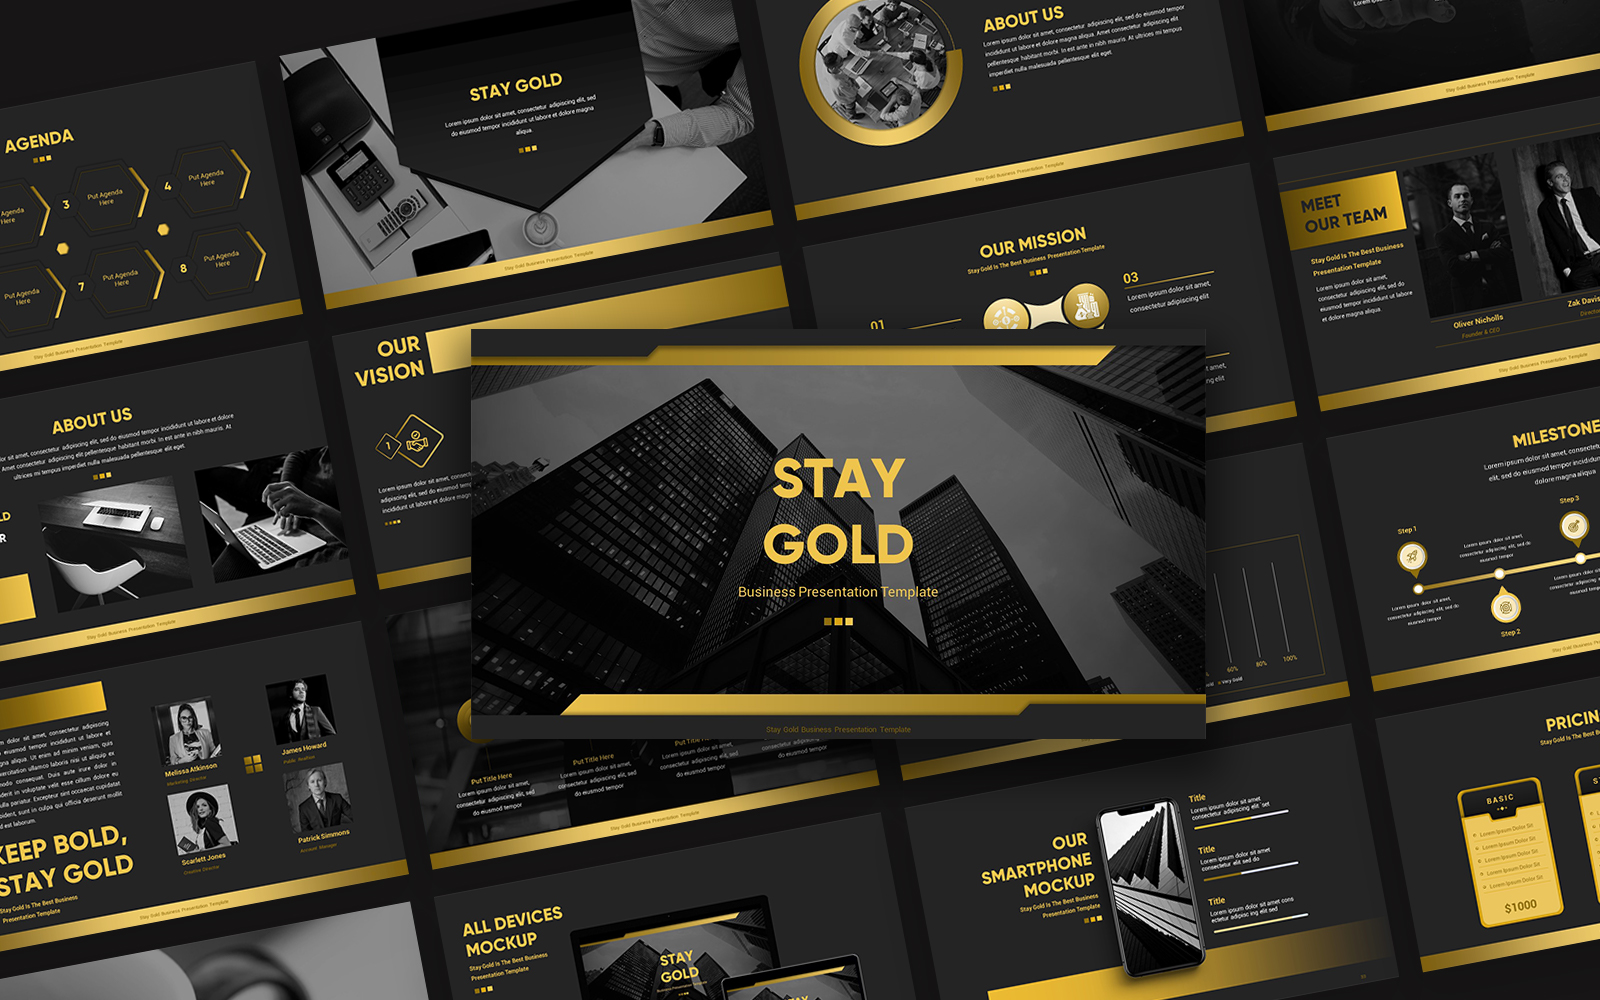 Stay Gold Business Presentation PowerPoint Template